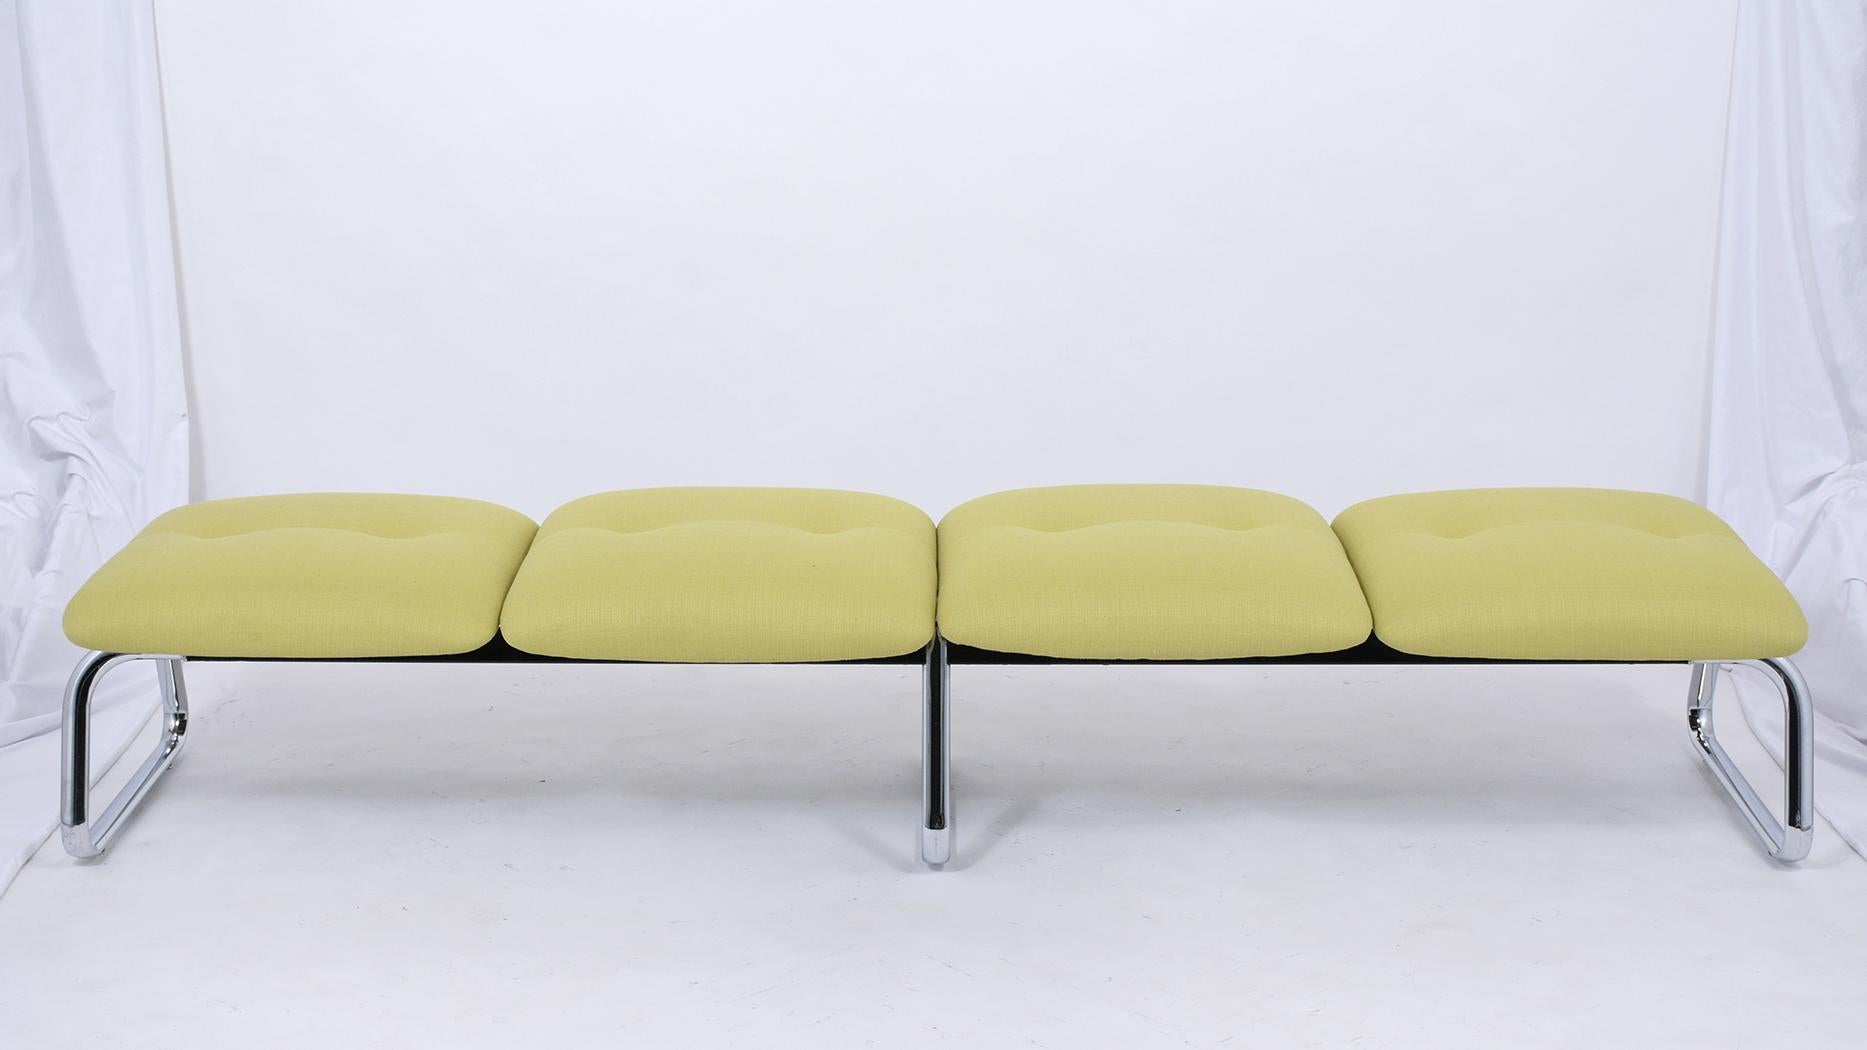 An eye-catching Mid-Century Modern Green Bench that features a four-seat design with tufted details and is newly restored by our team of craftsmen. Each seat is newly upholstered in a new green fabric with comfortable foam inserts and rests on a